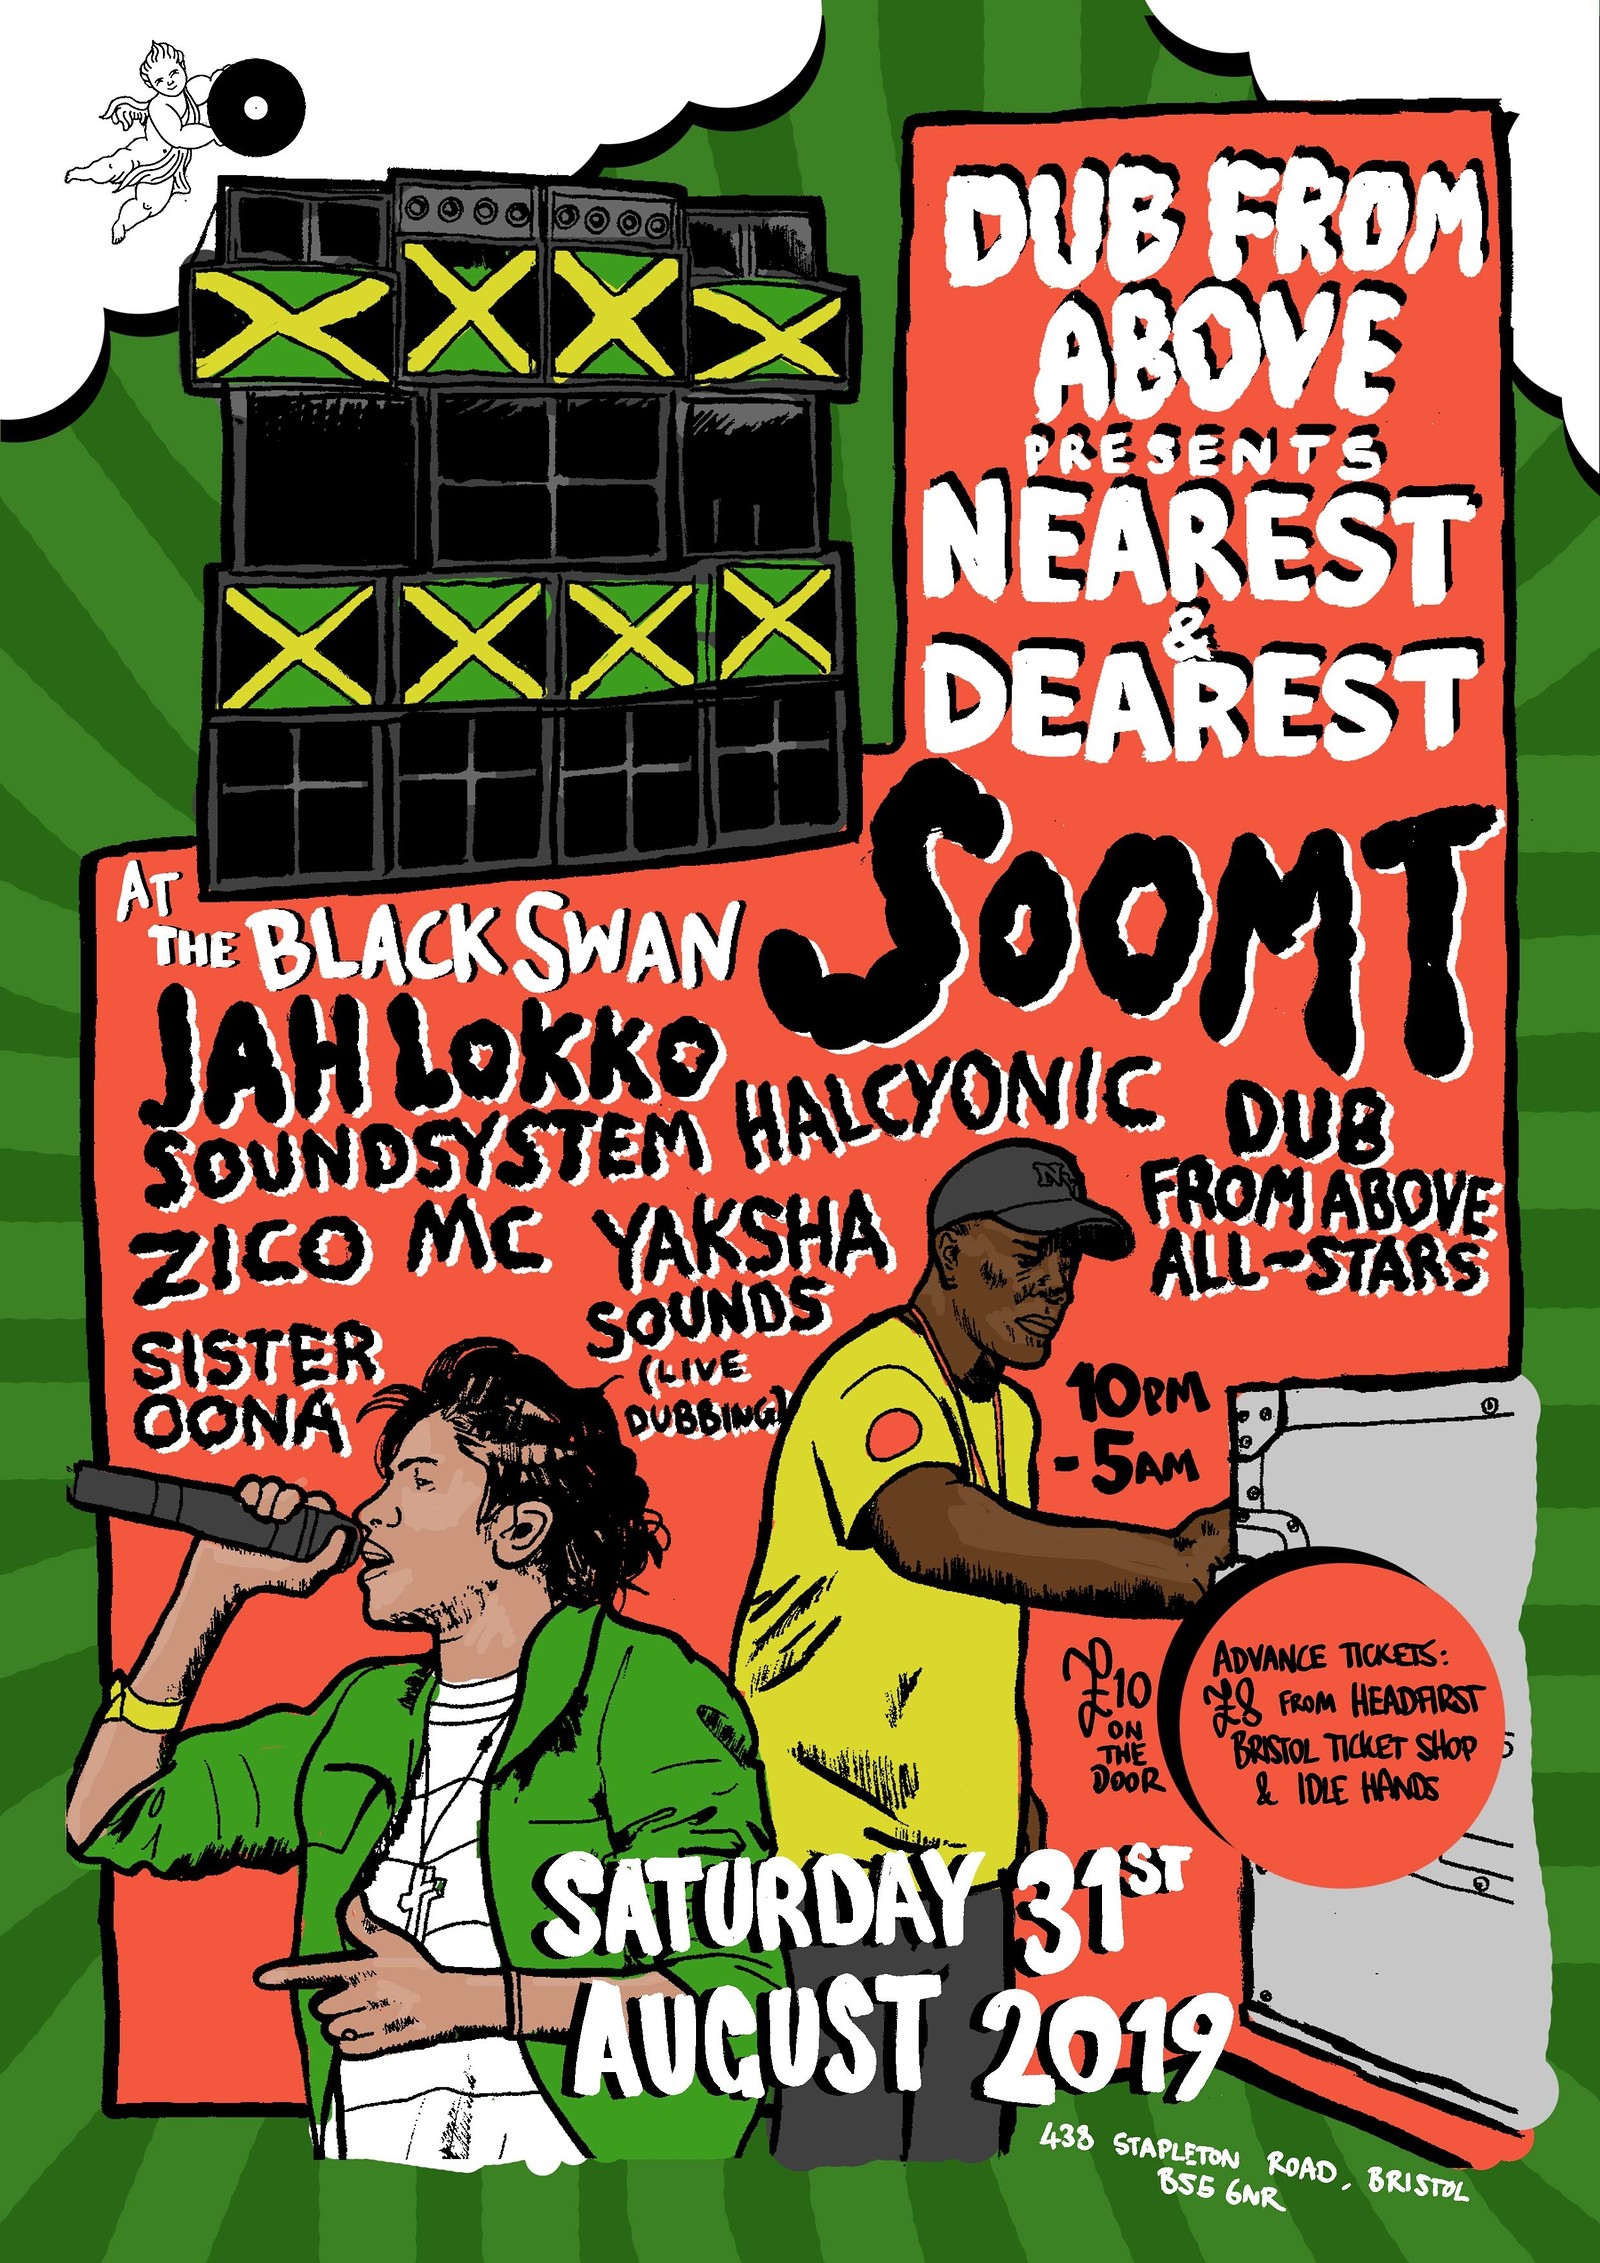 Dub From Above Present: Nearest & Dearest at The Black Swan